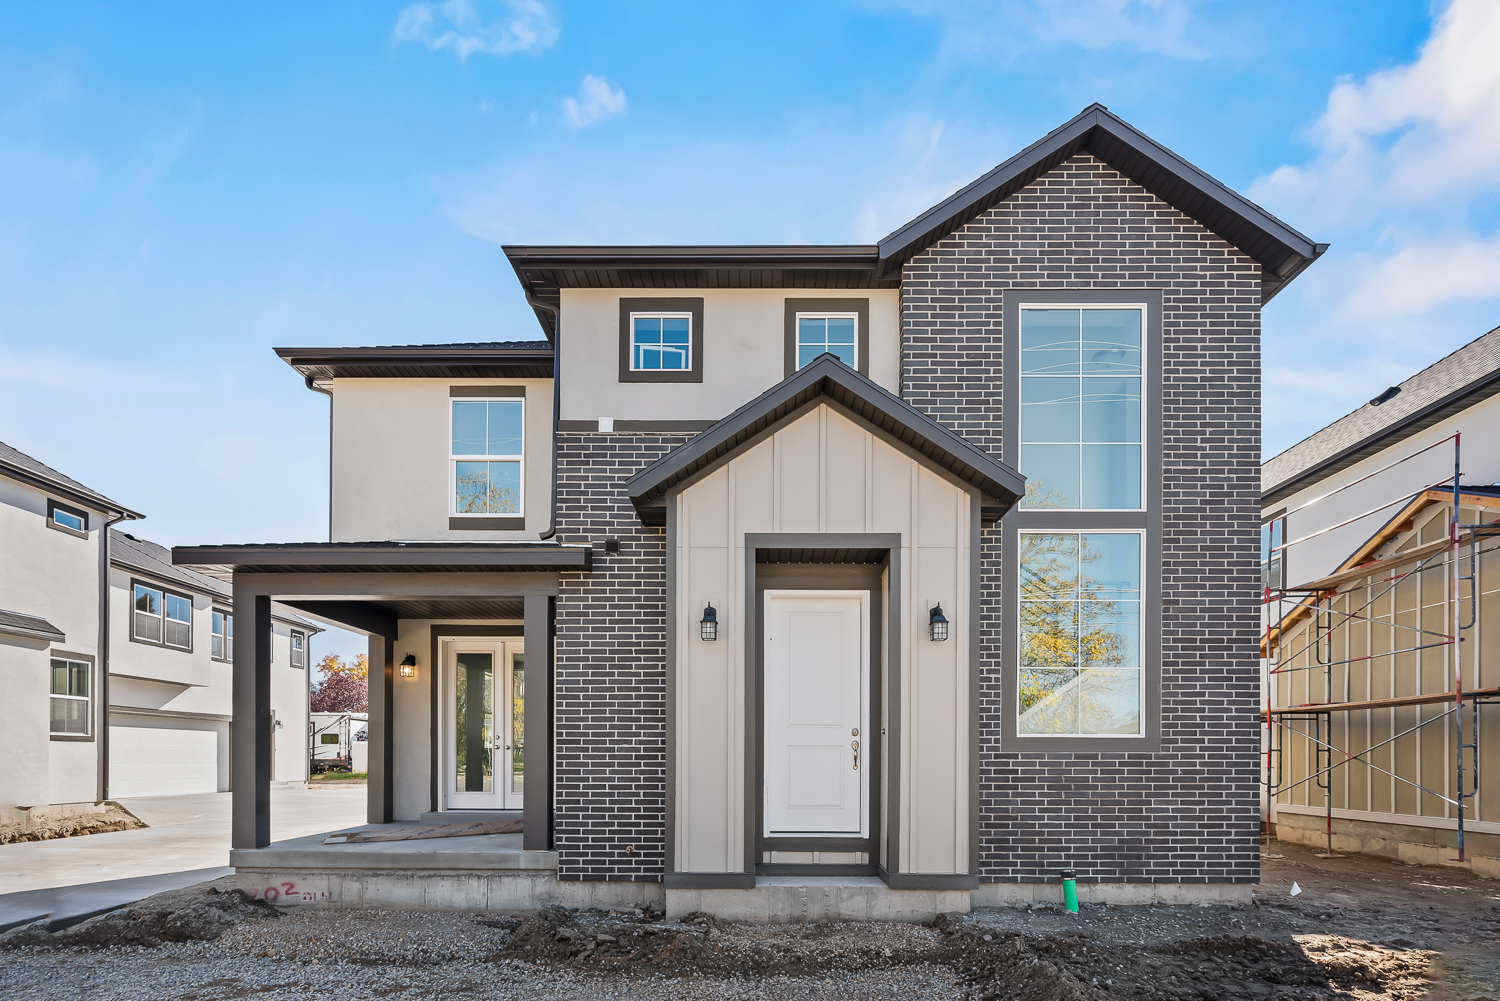 Introducing Innovative New Home Plans At The Pines At Midvale